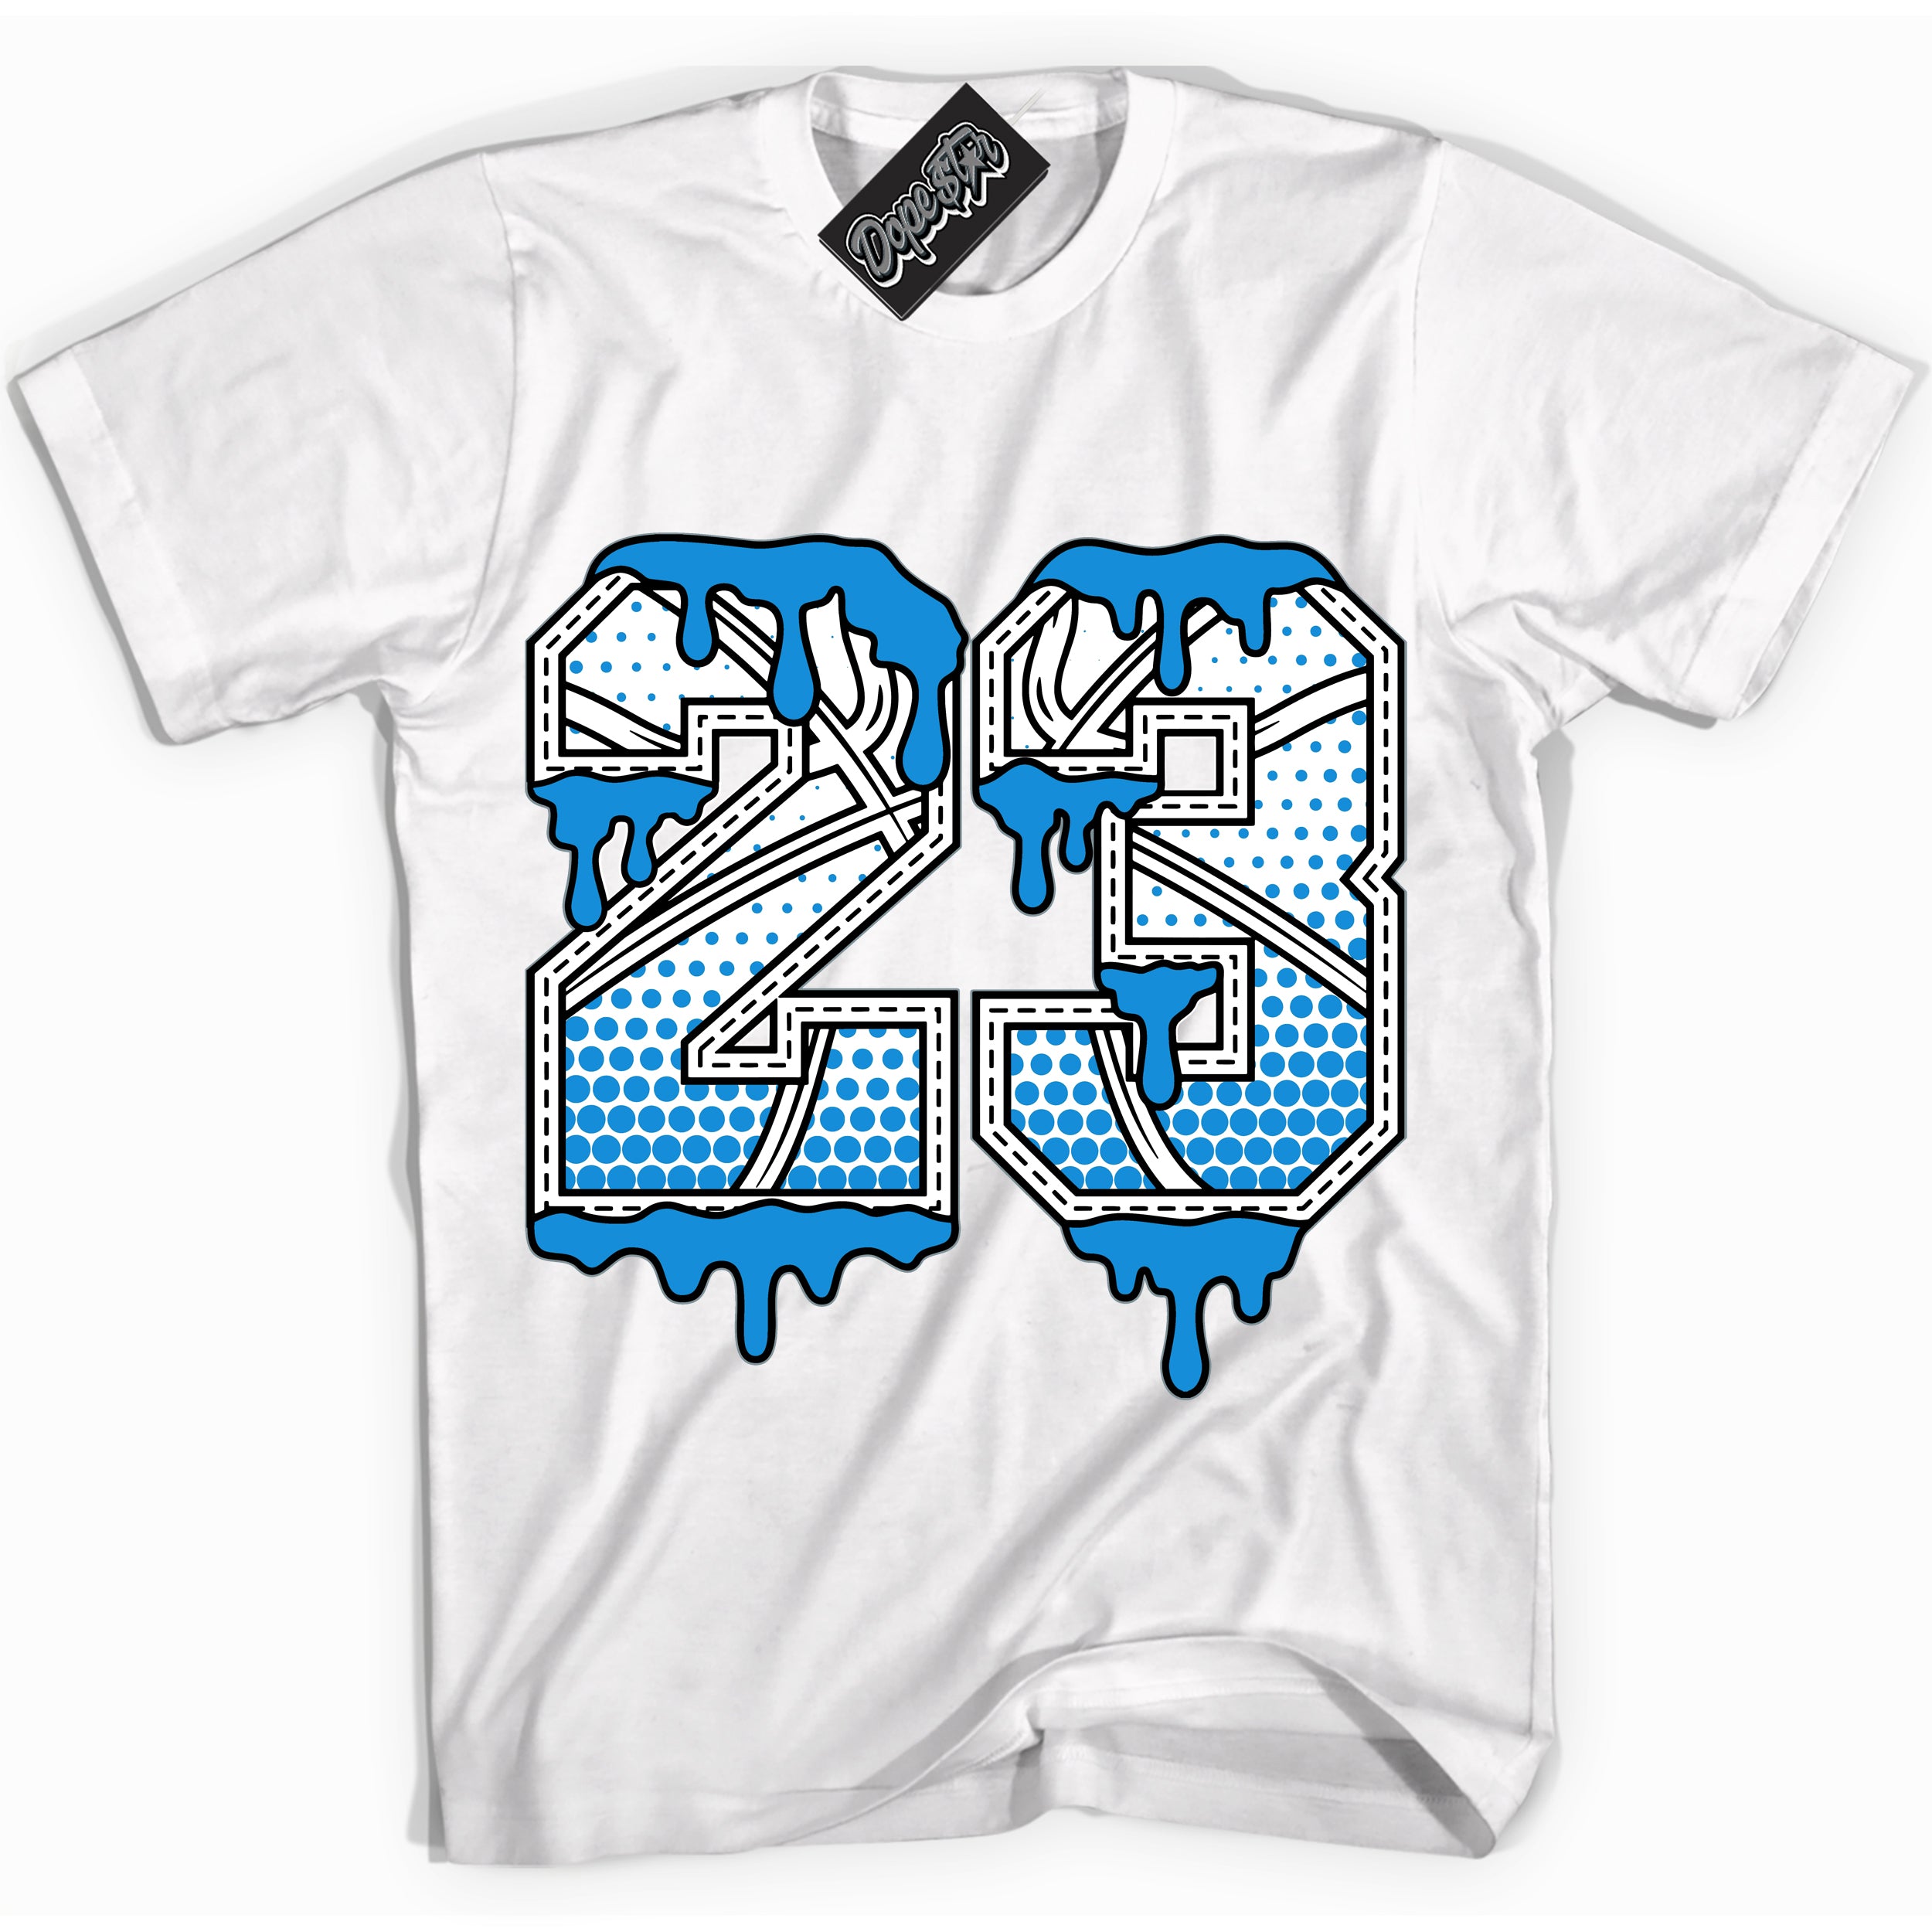 Cool White graphic tee with “23 Ball ” design, that perfectly matches Powder Blue 9s sneakers 